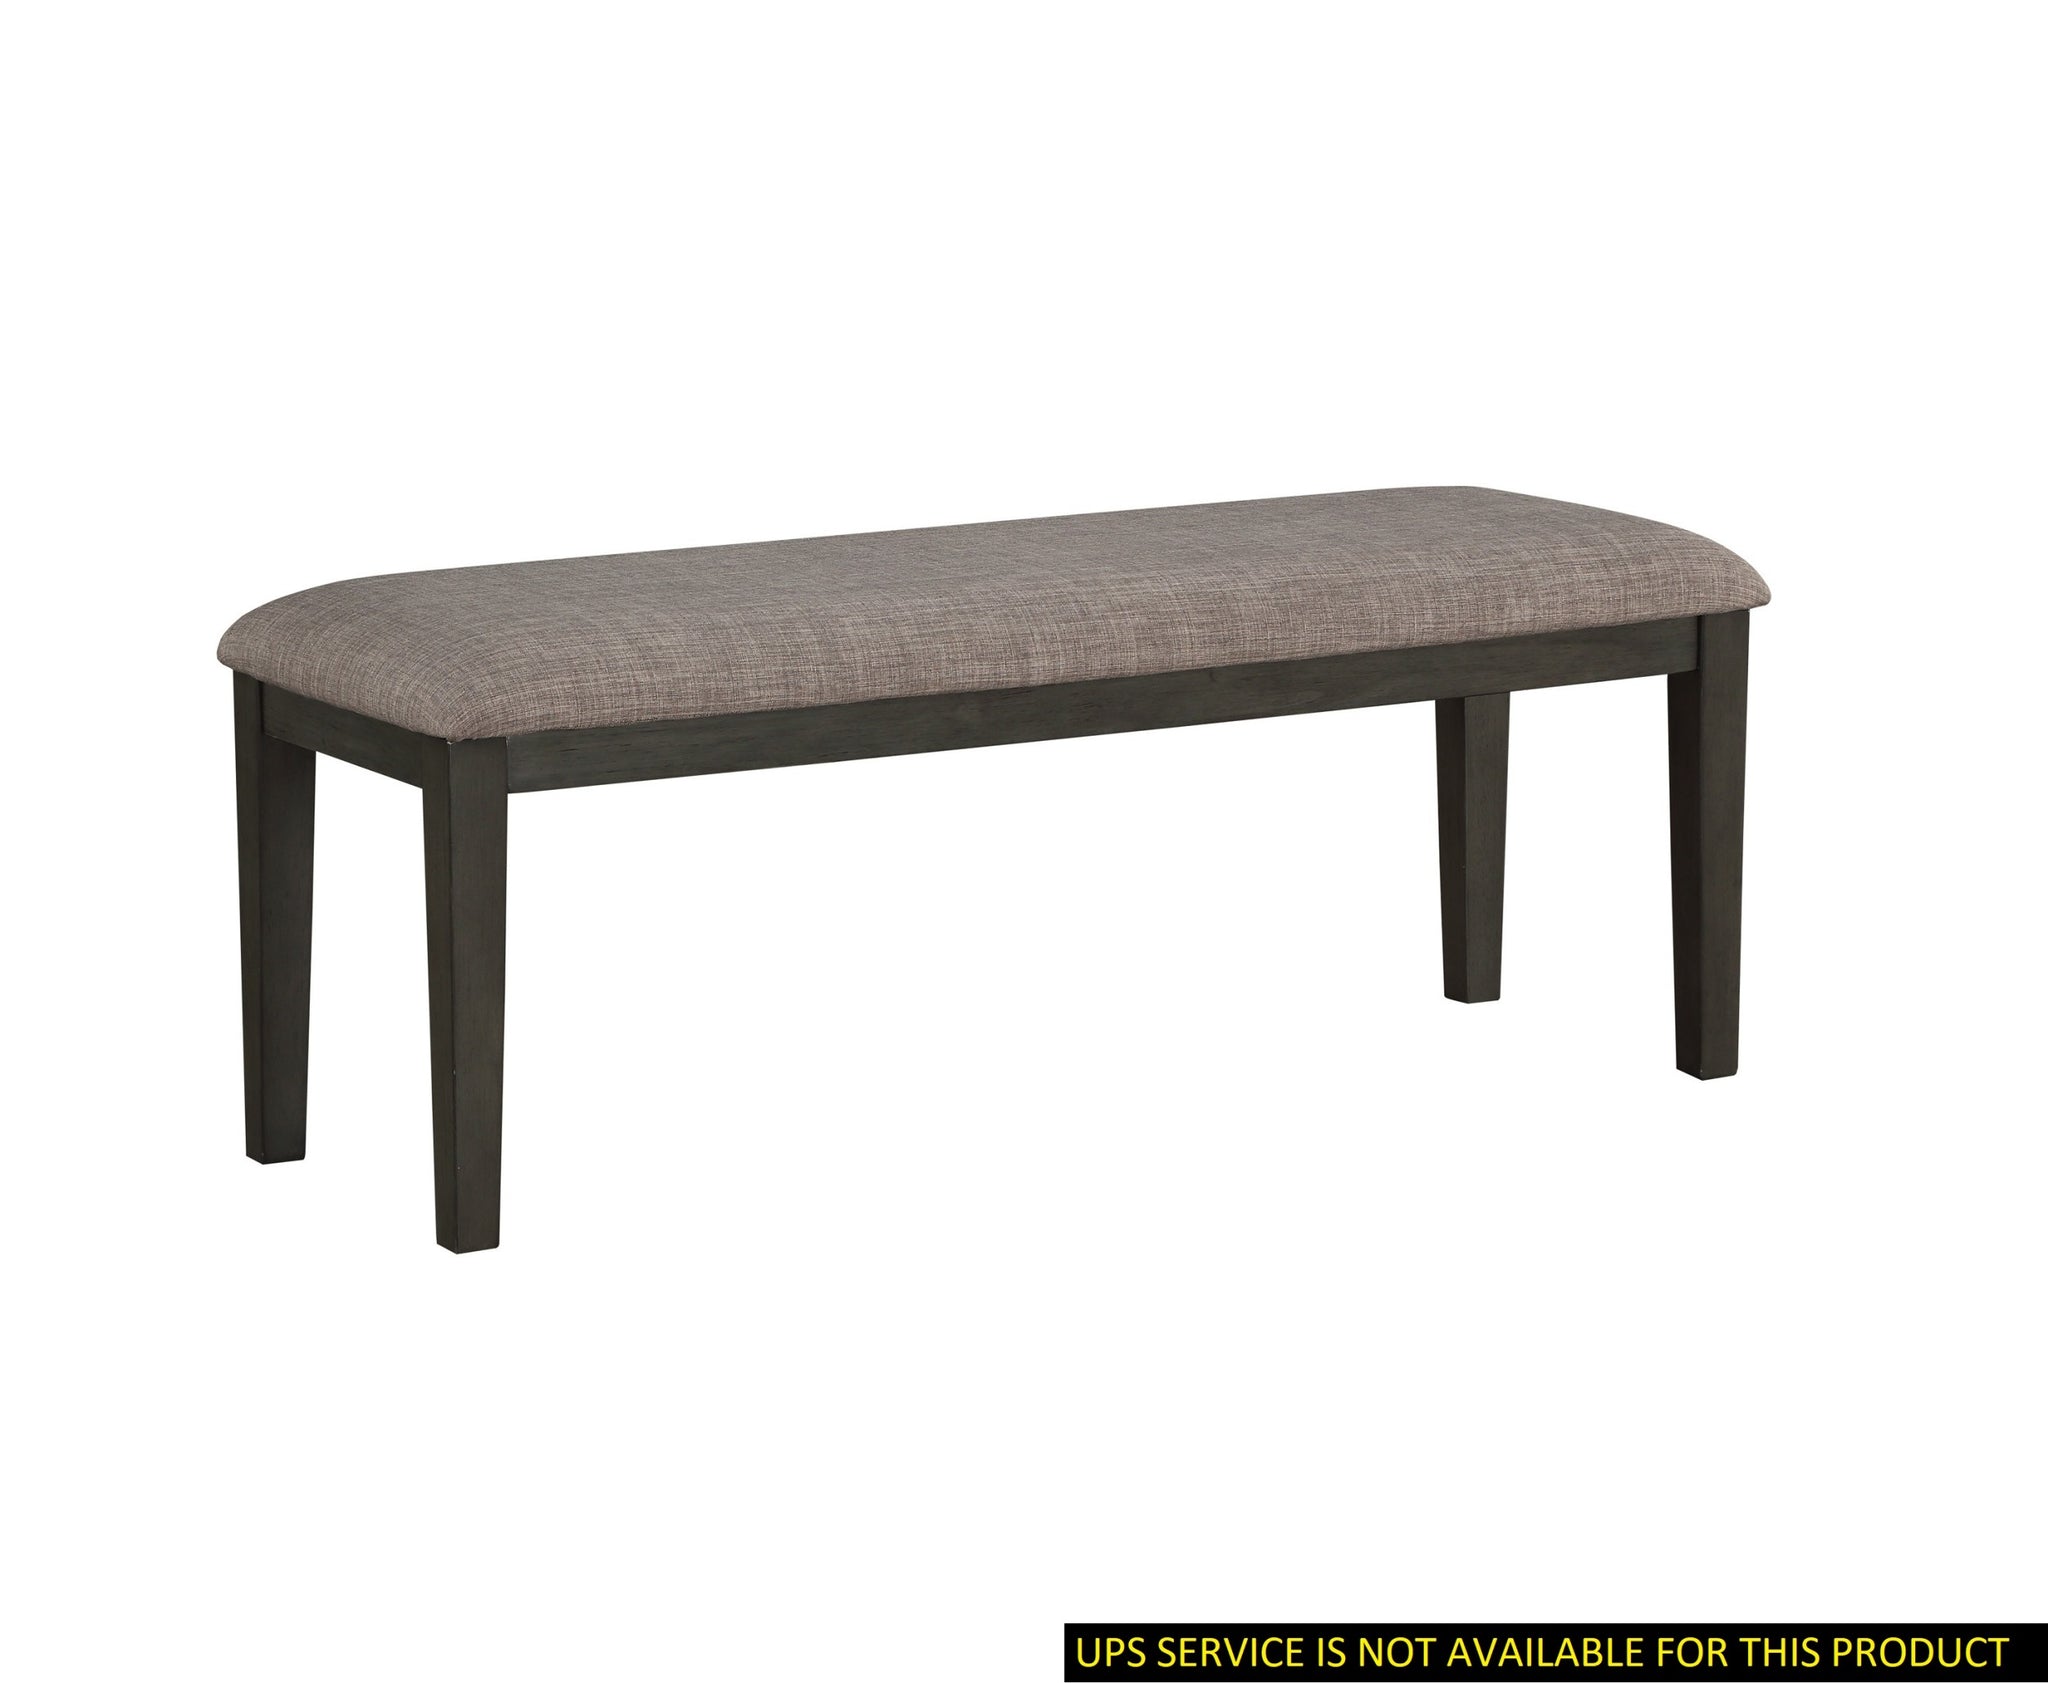 Transitional Look Gray Finish Wood Framed 1pc Bench gray-dining room-transitional-wood